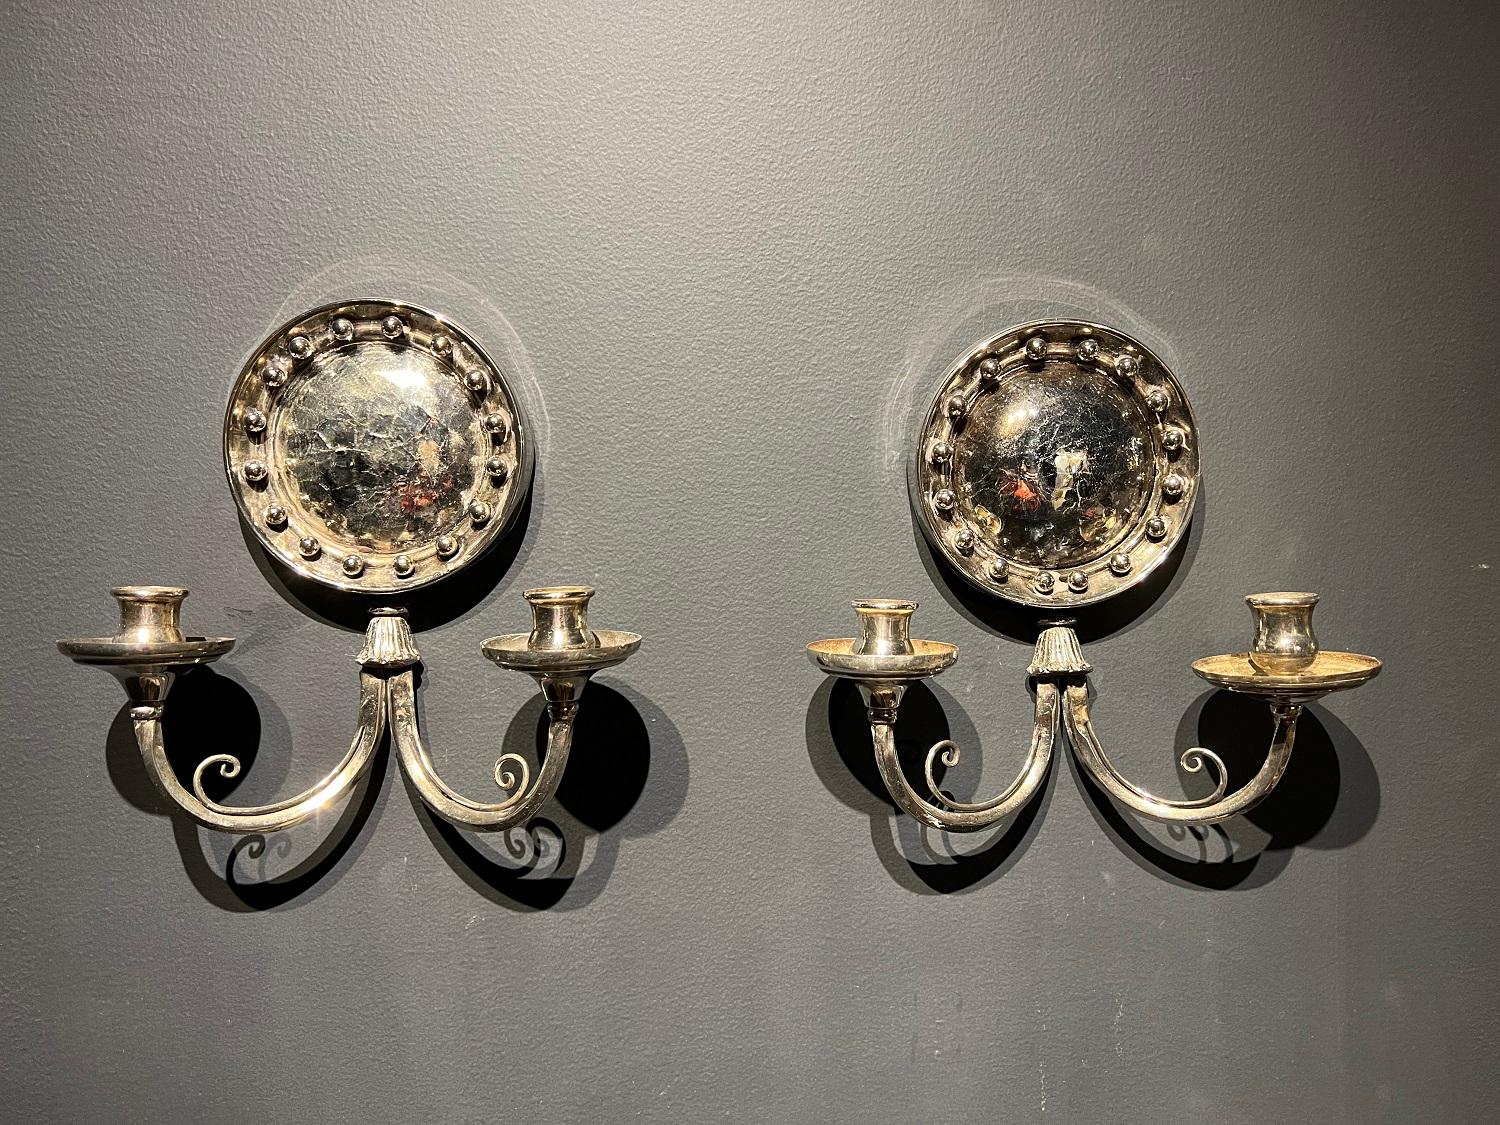 A pair of circa 1920’s Silver plated sconces with cracked mirrored backplate and two lights. Lamp shade is not included. In very good vintage condition. 

Up to 120V (US Standard)
Hardwired

Dealer: G302YP

